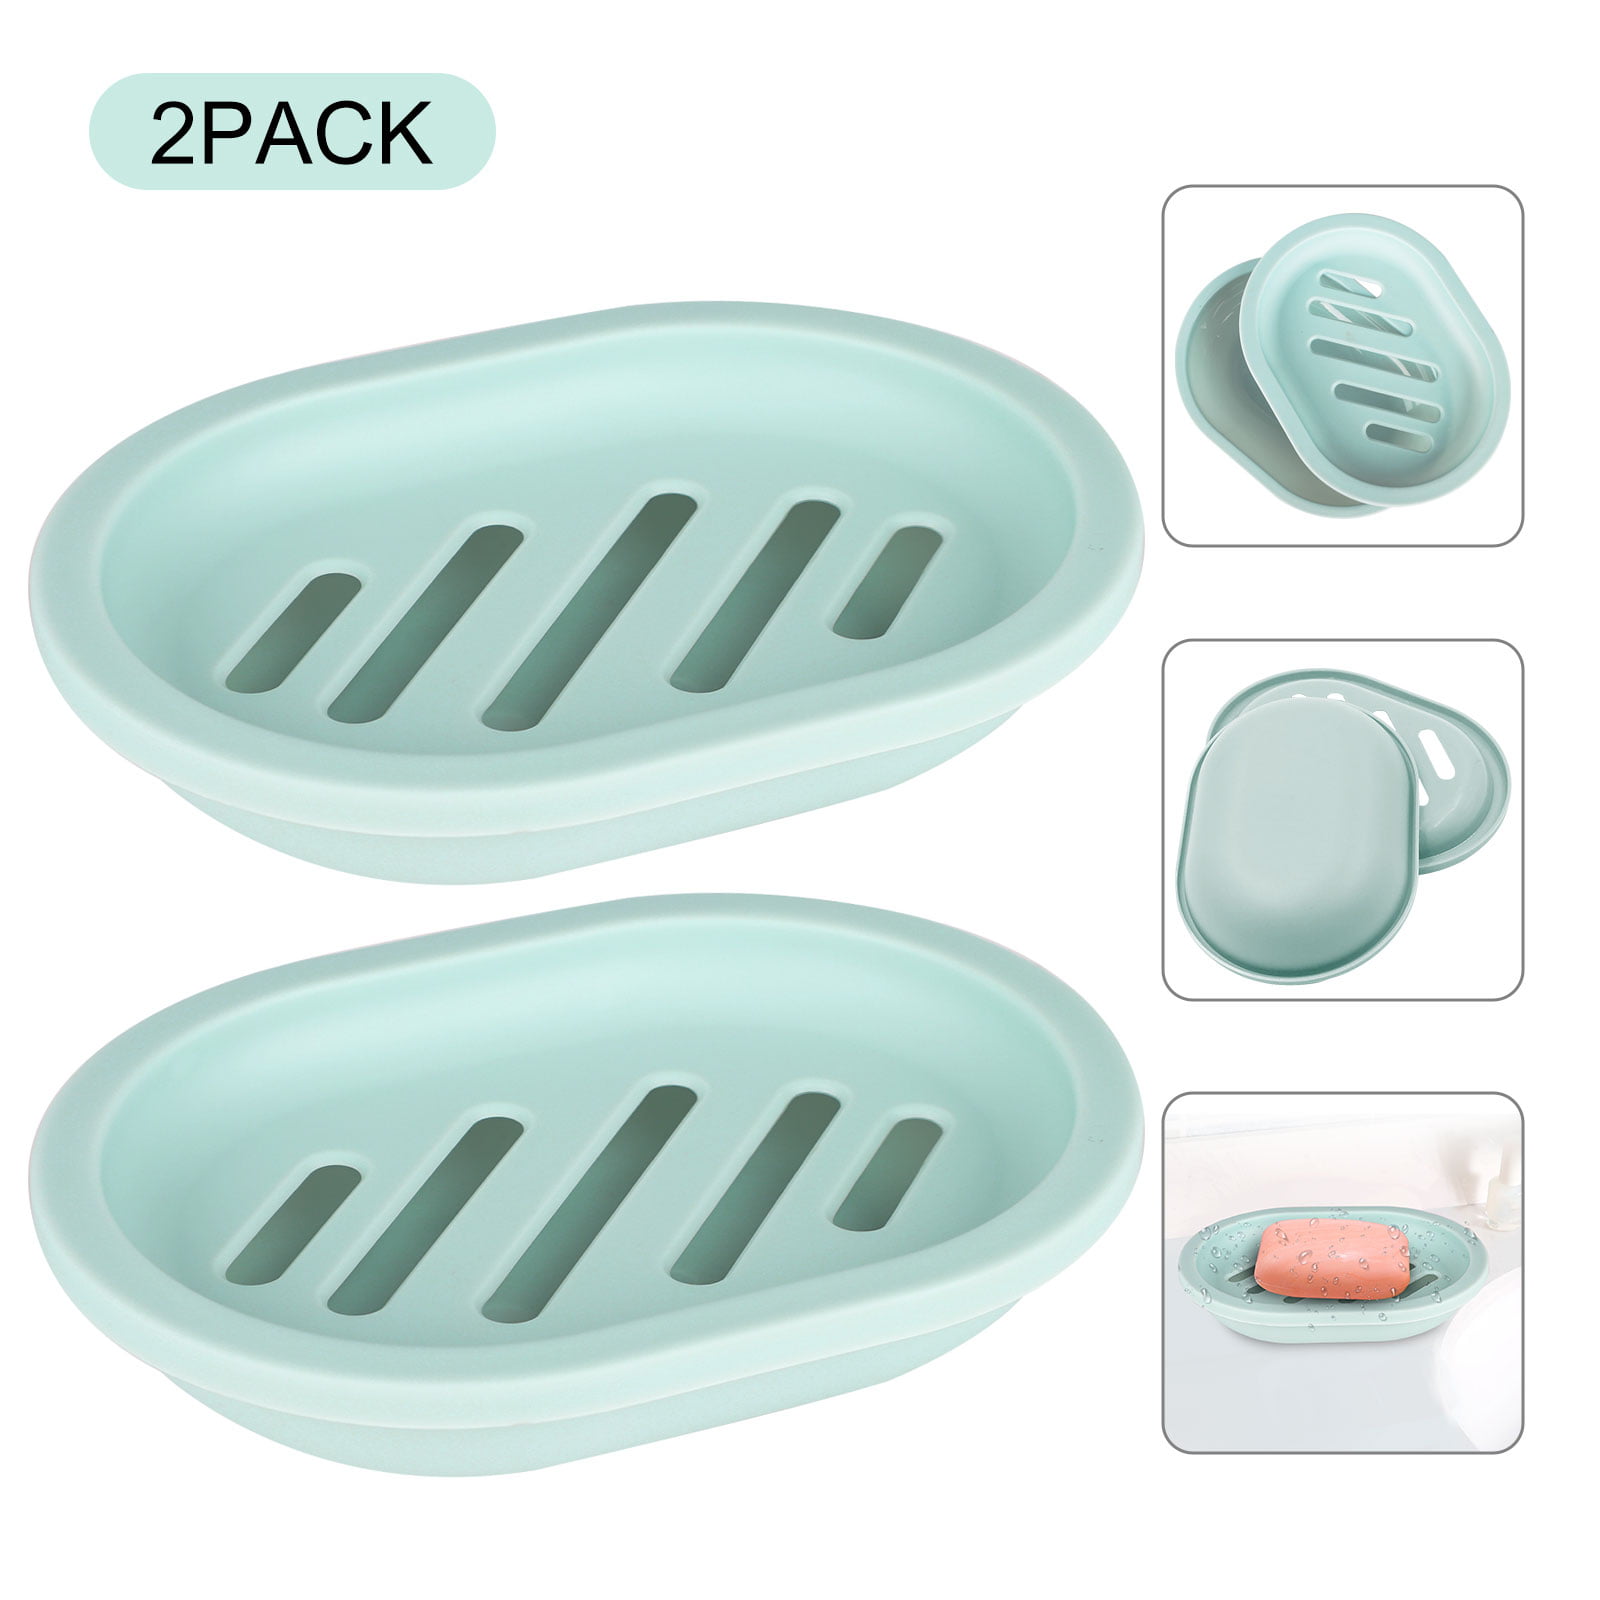 PP Plastic Soap Dish For Drain Soap Case Tray Holder For Bathroom 